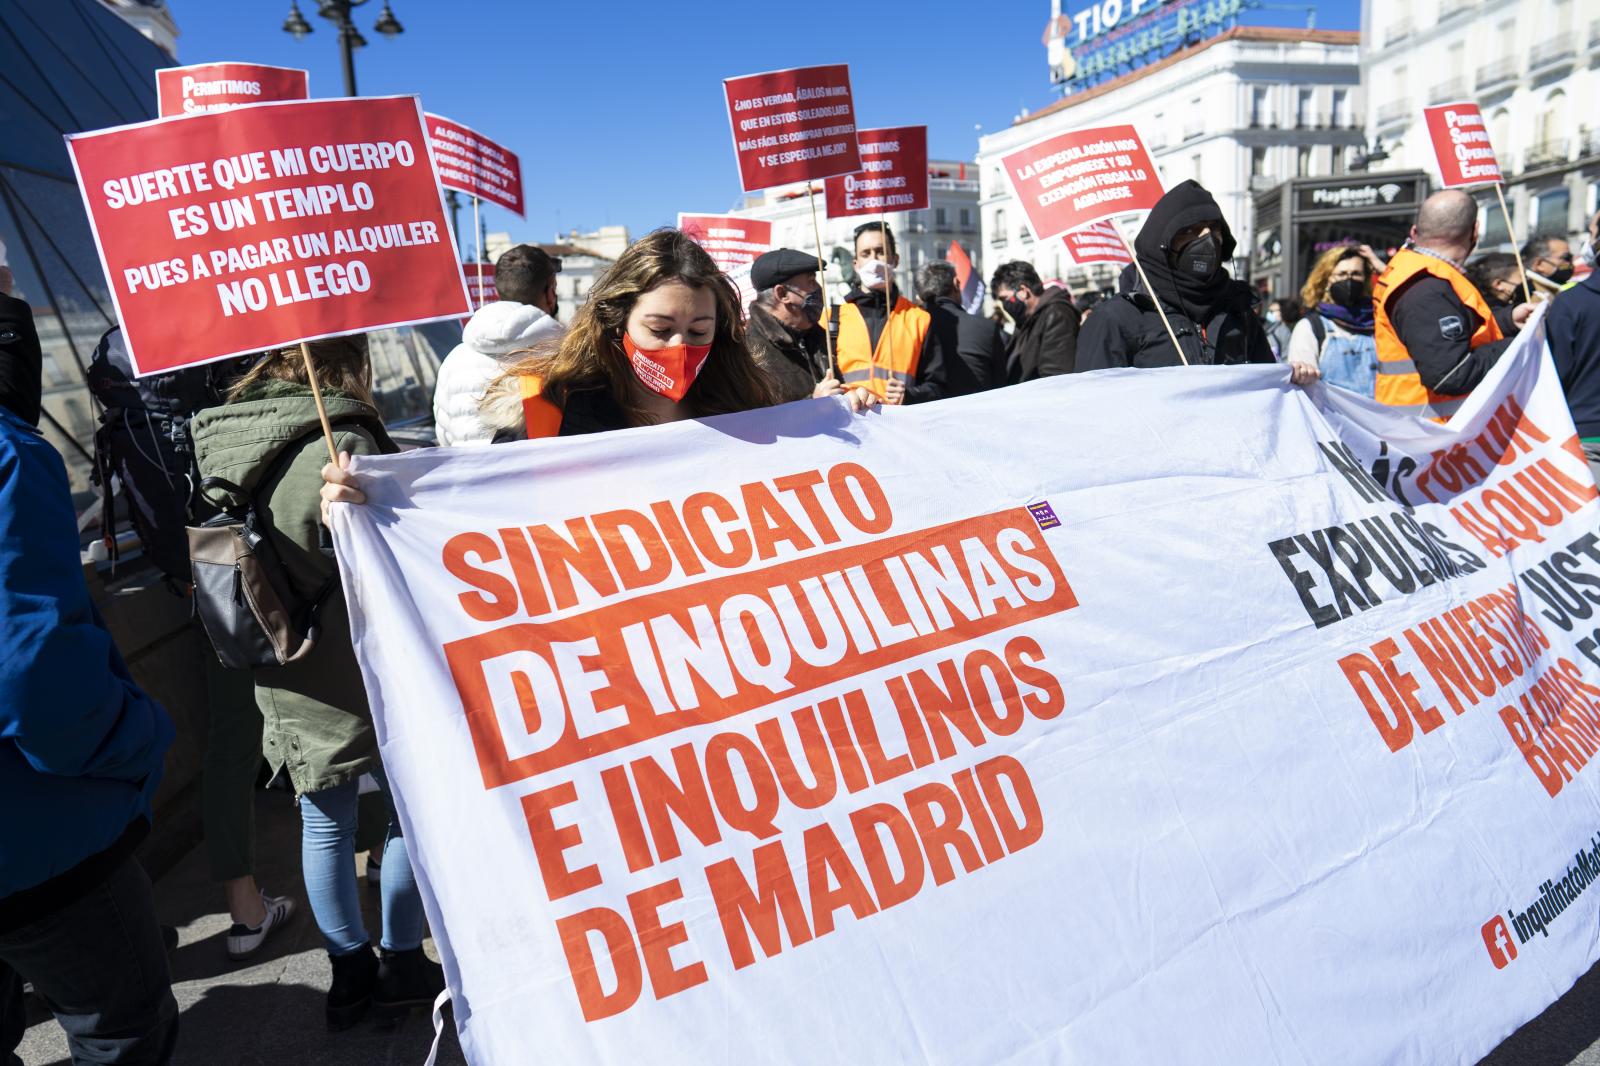 Image from Overview - Demonstration in Madrid organized by Tenant's Union...